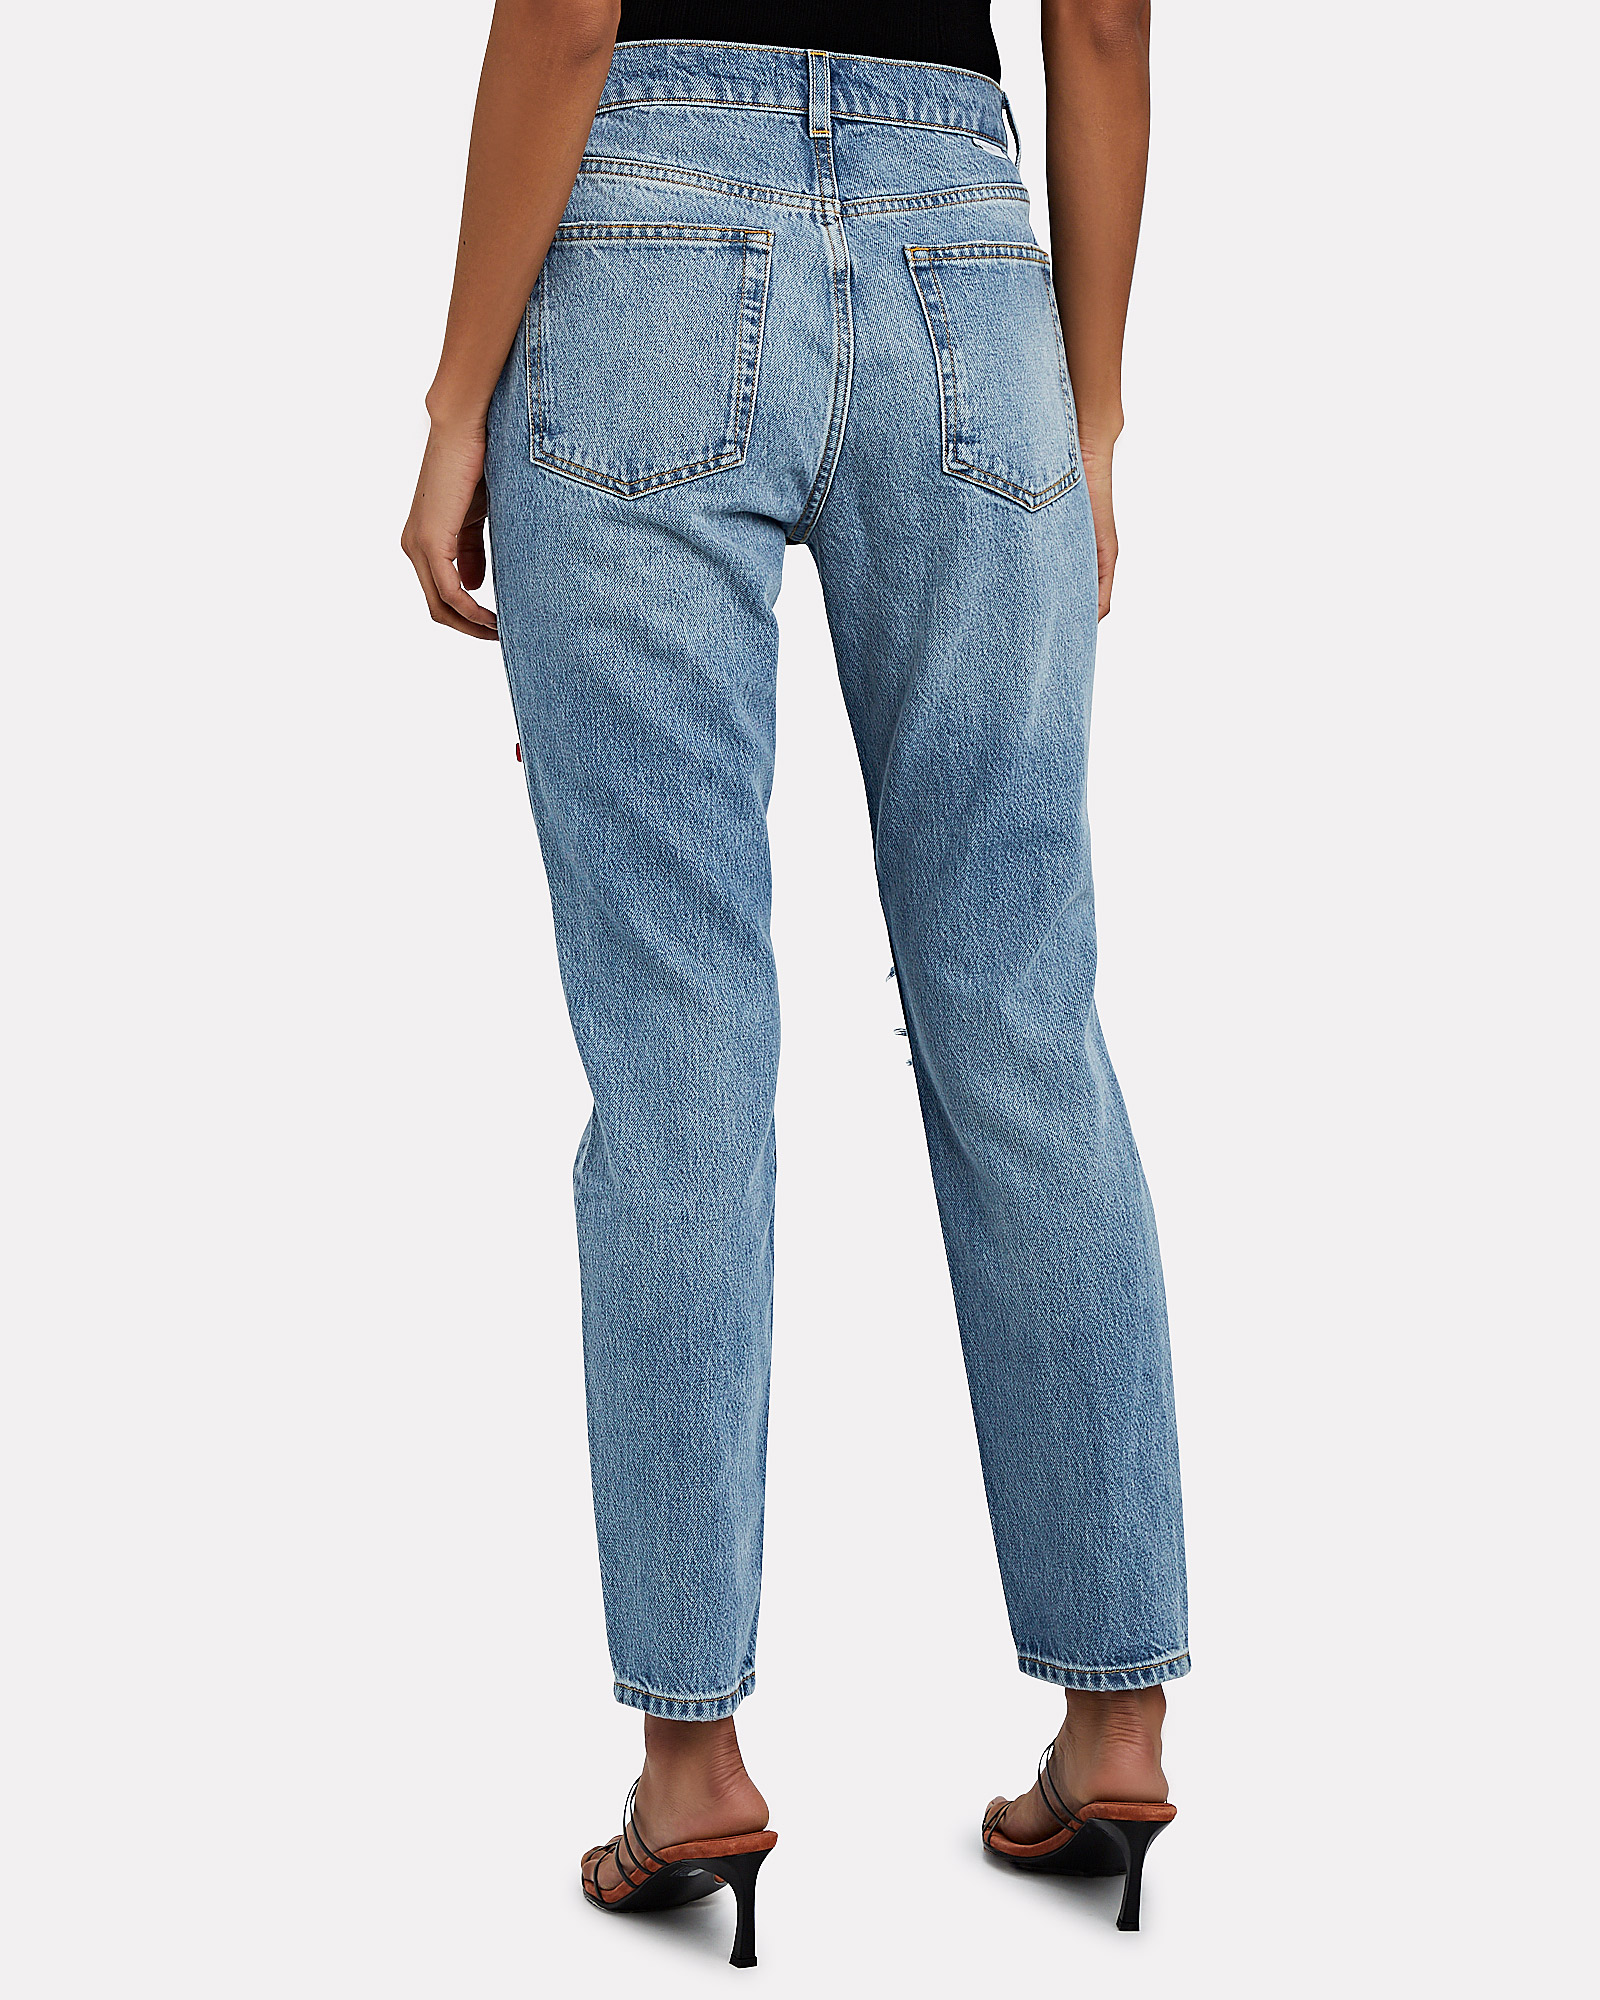 Boyish Jeans Billy Distressed High-Rise Jeans | INTERMIX®